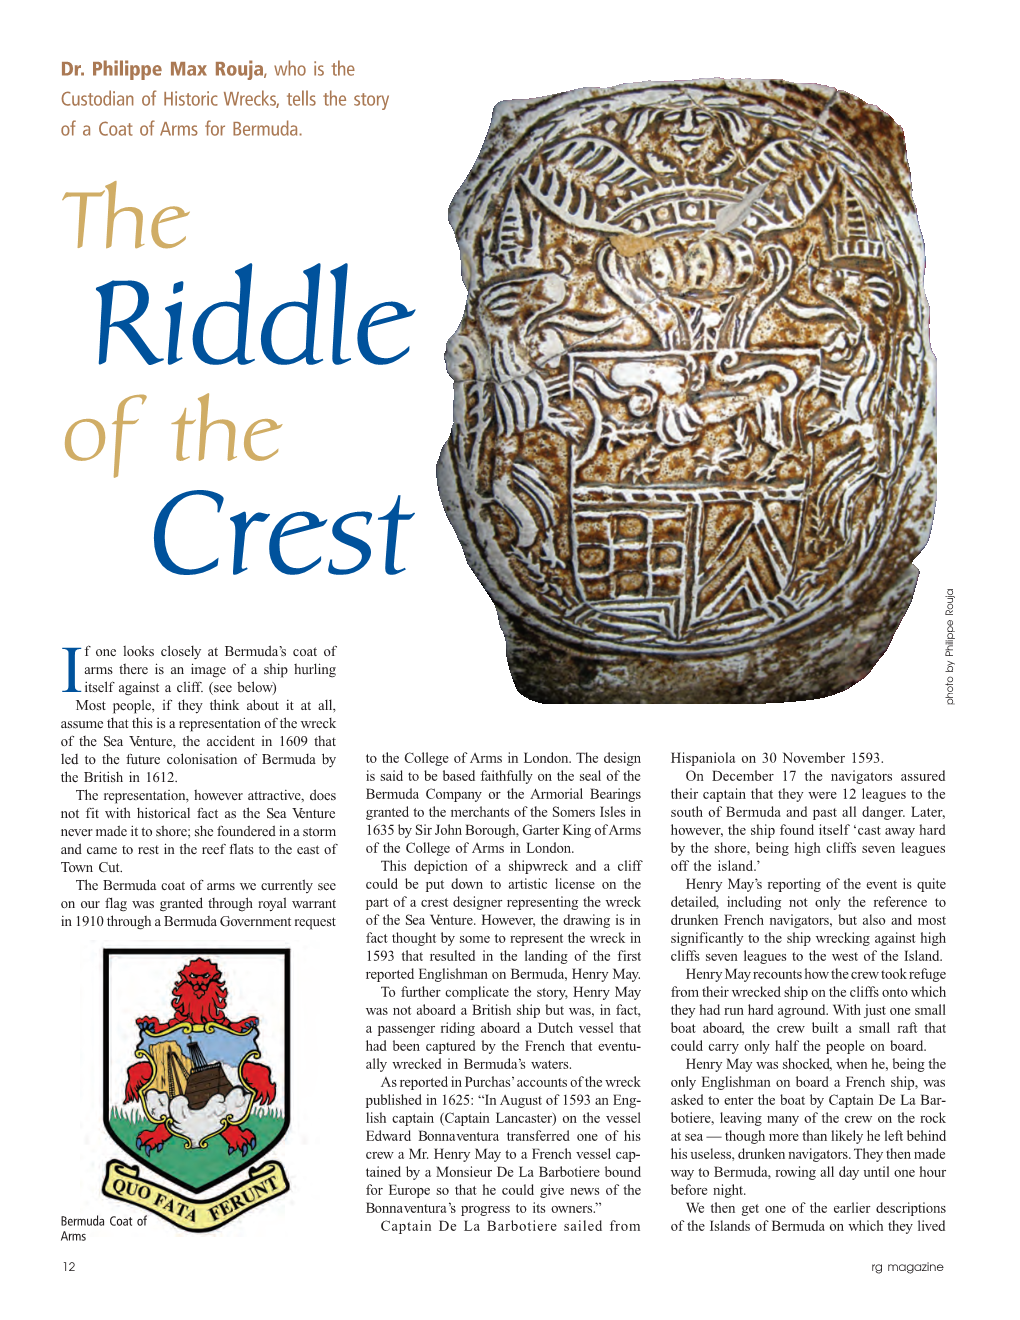 The Riddle of the Crest